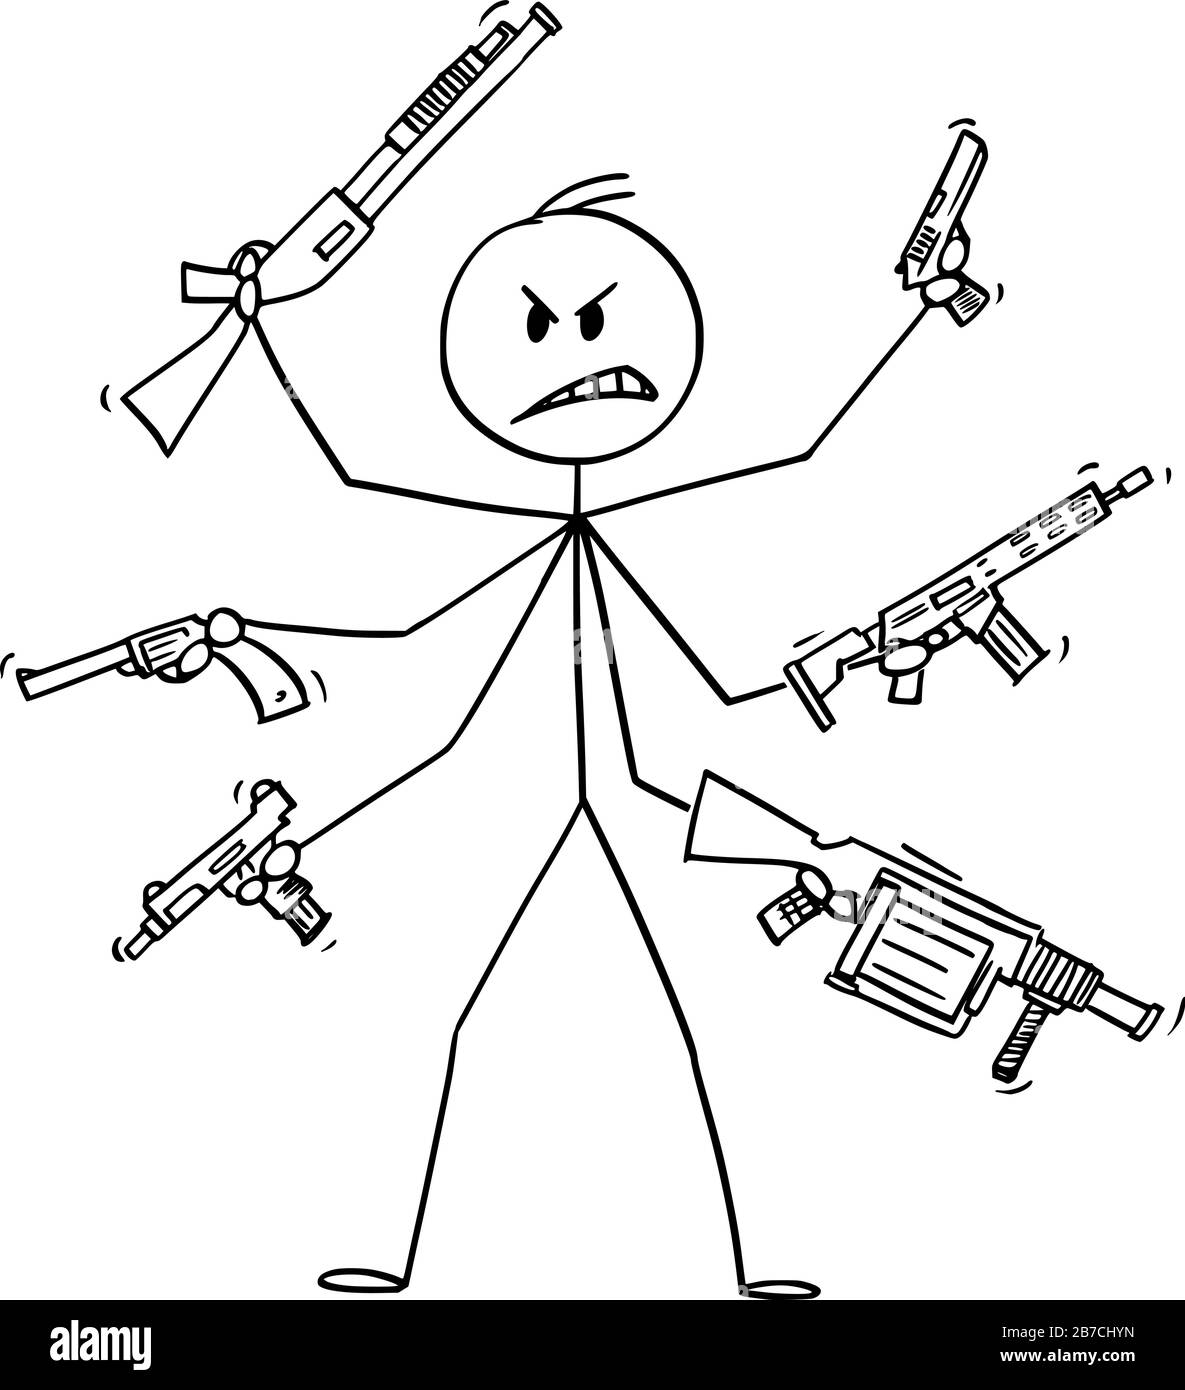 Vector cartoon stick figure drawing conceptual illustration of man with six arms holding weapons like pistol,rifle,grenade launcher and sub-machine gun.Concept of fight and violence. Stock Vector